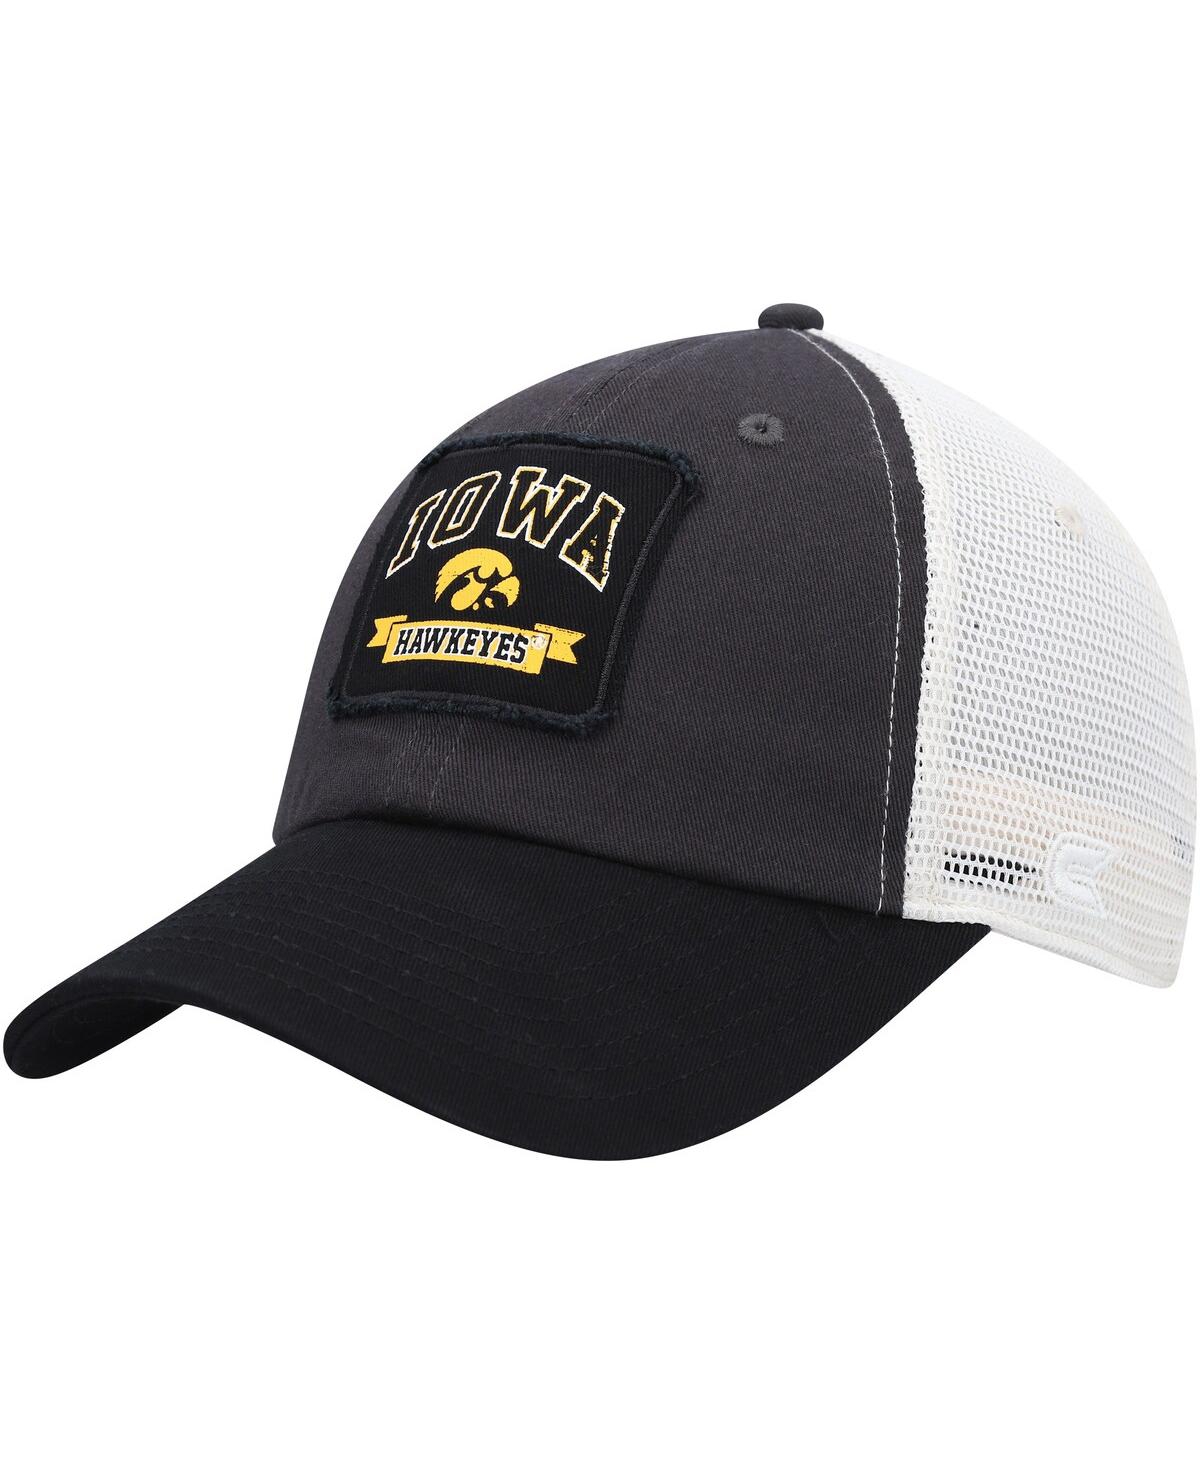 Men's Colosseum Charcoal Iowa Hawkeyes Objection Snapback Hat - Charcoal